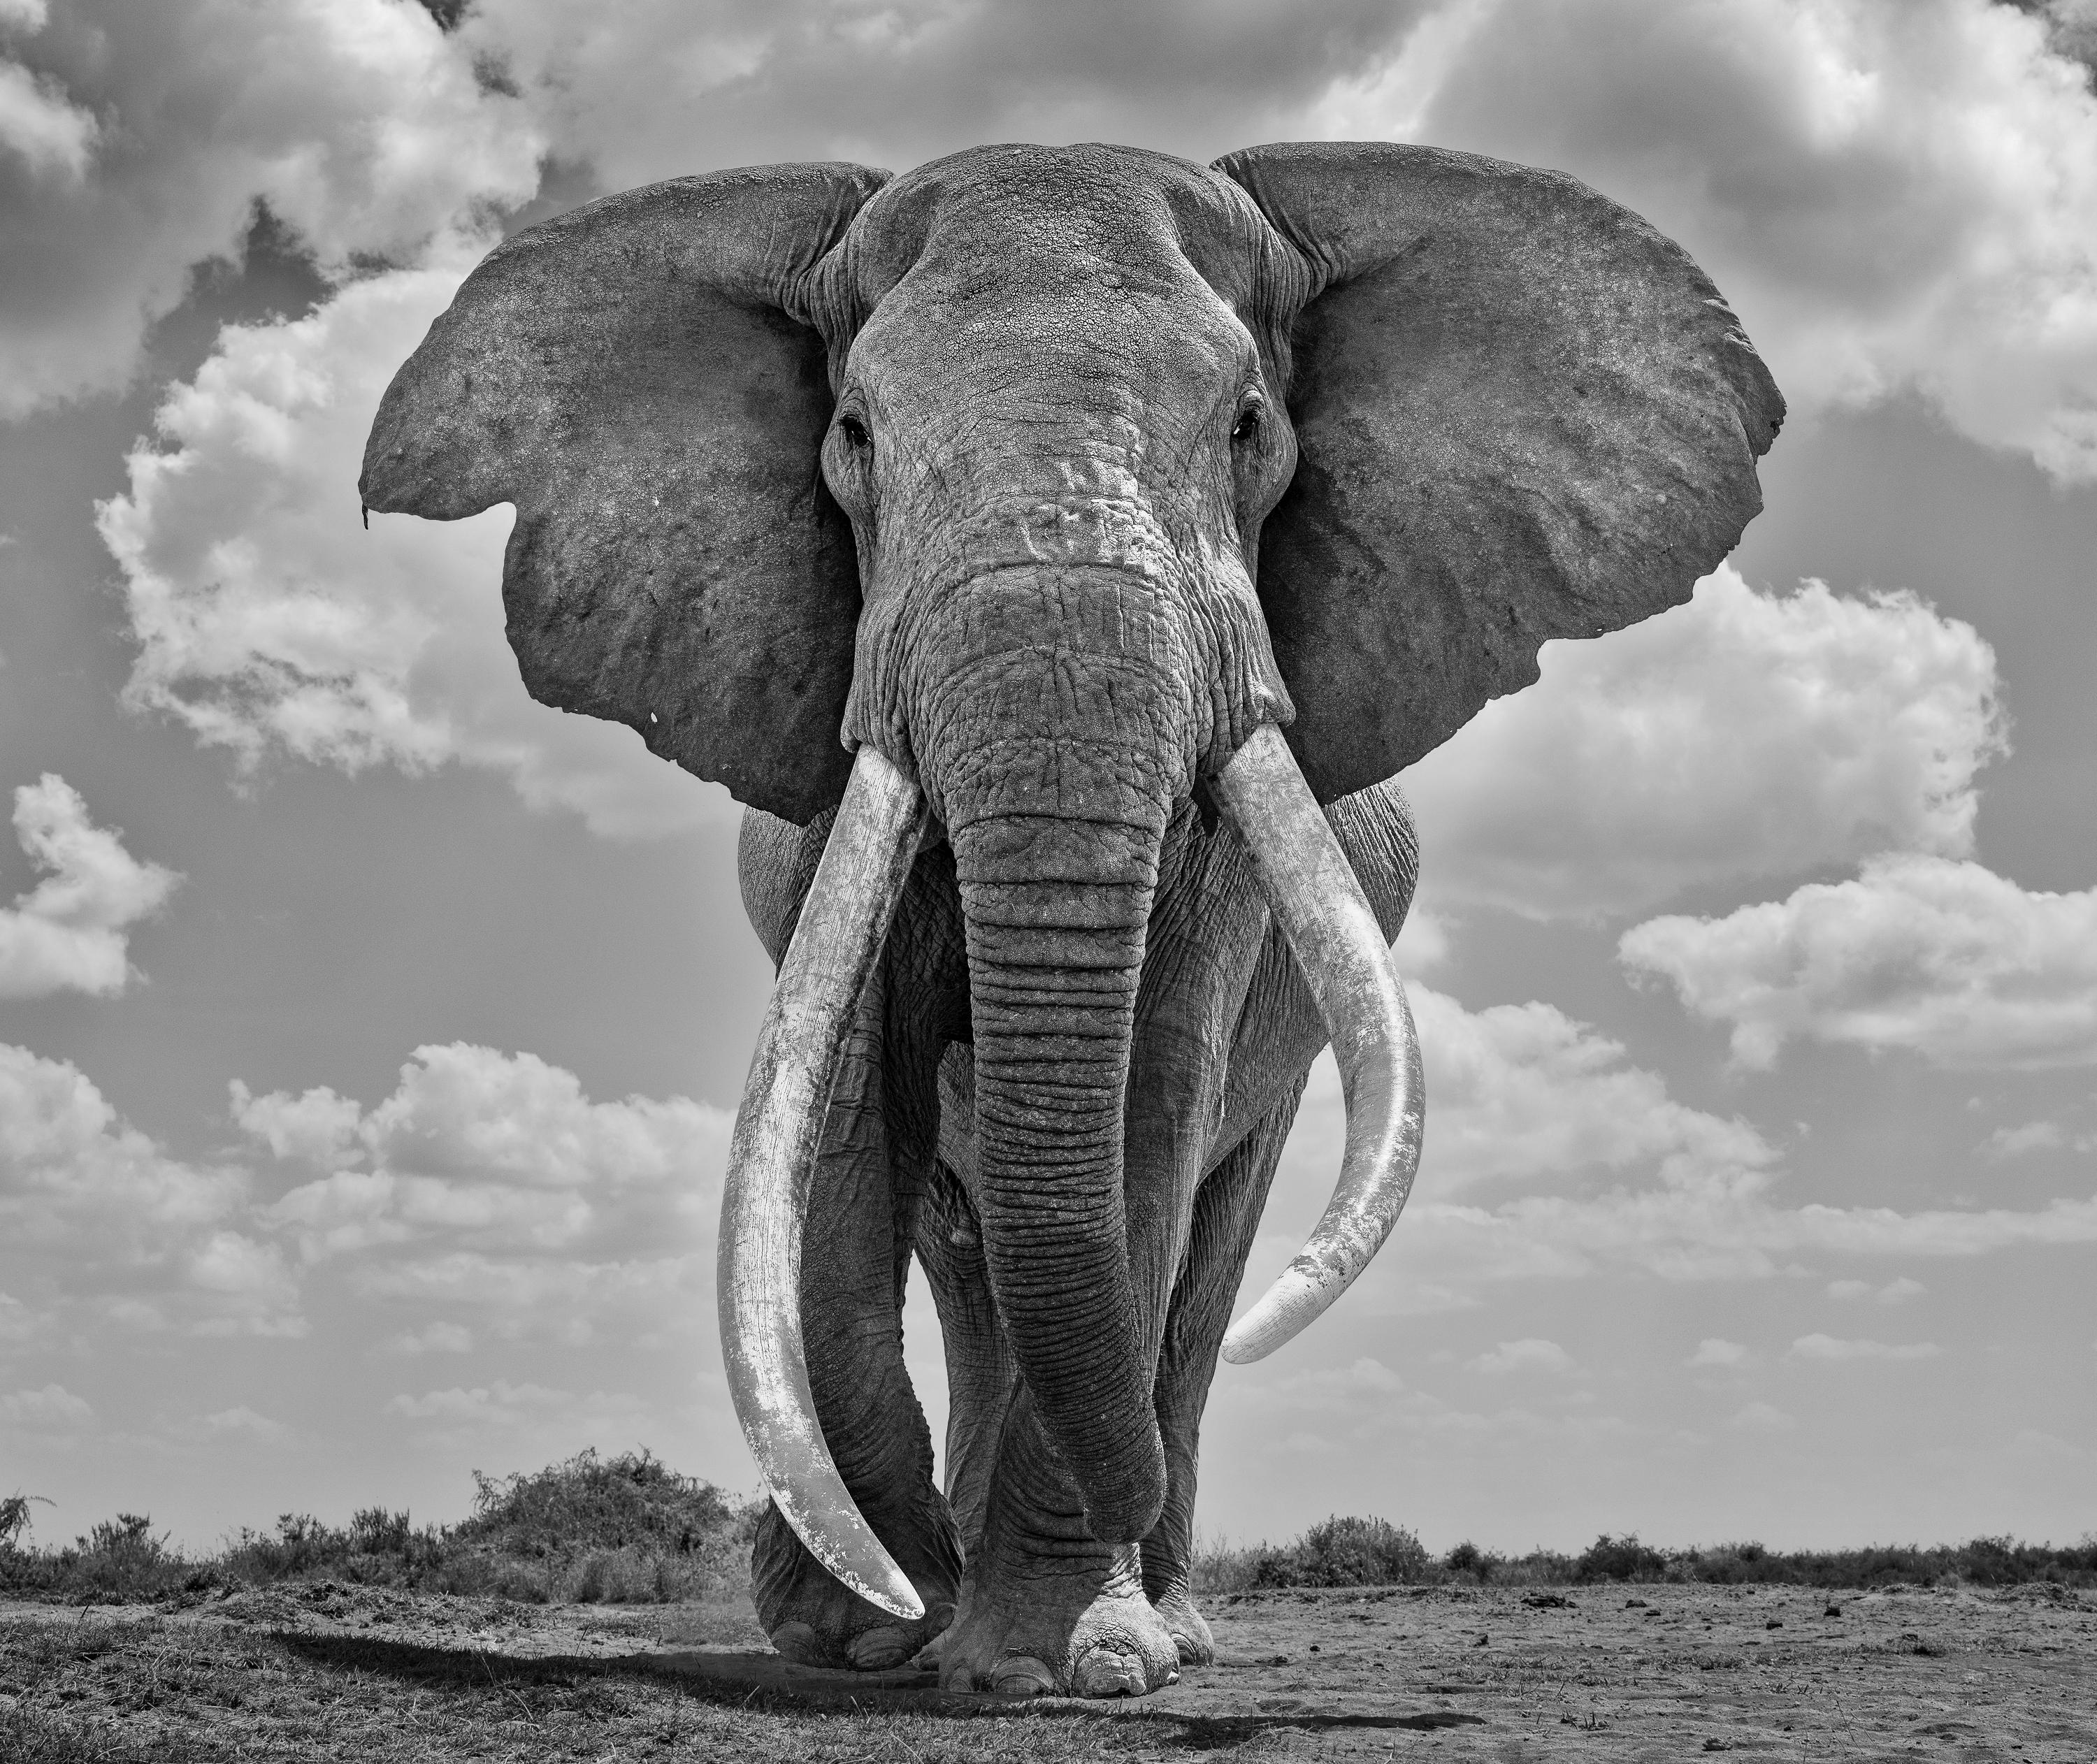 James Lewin Black and White Photograph - 21st Century Mammoth, 2021 (18" x 21.39")